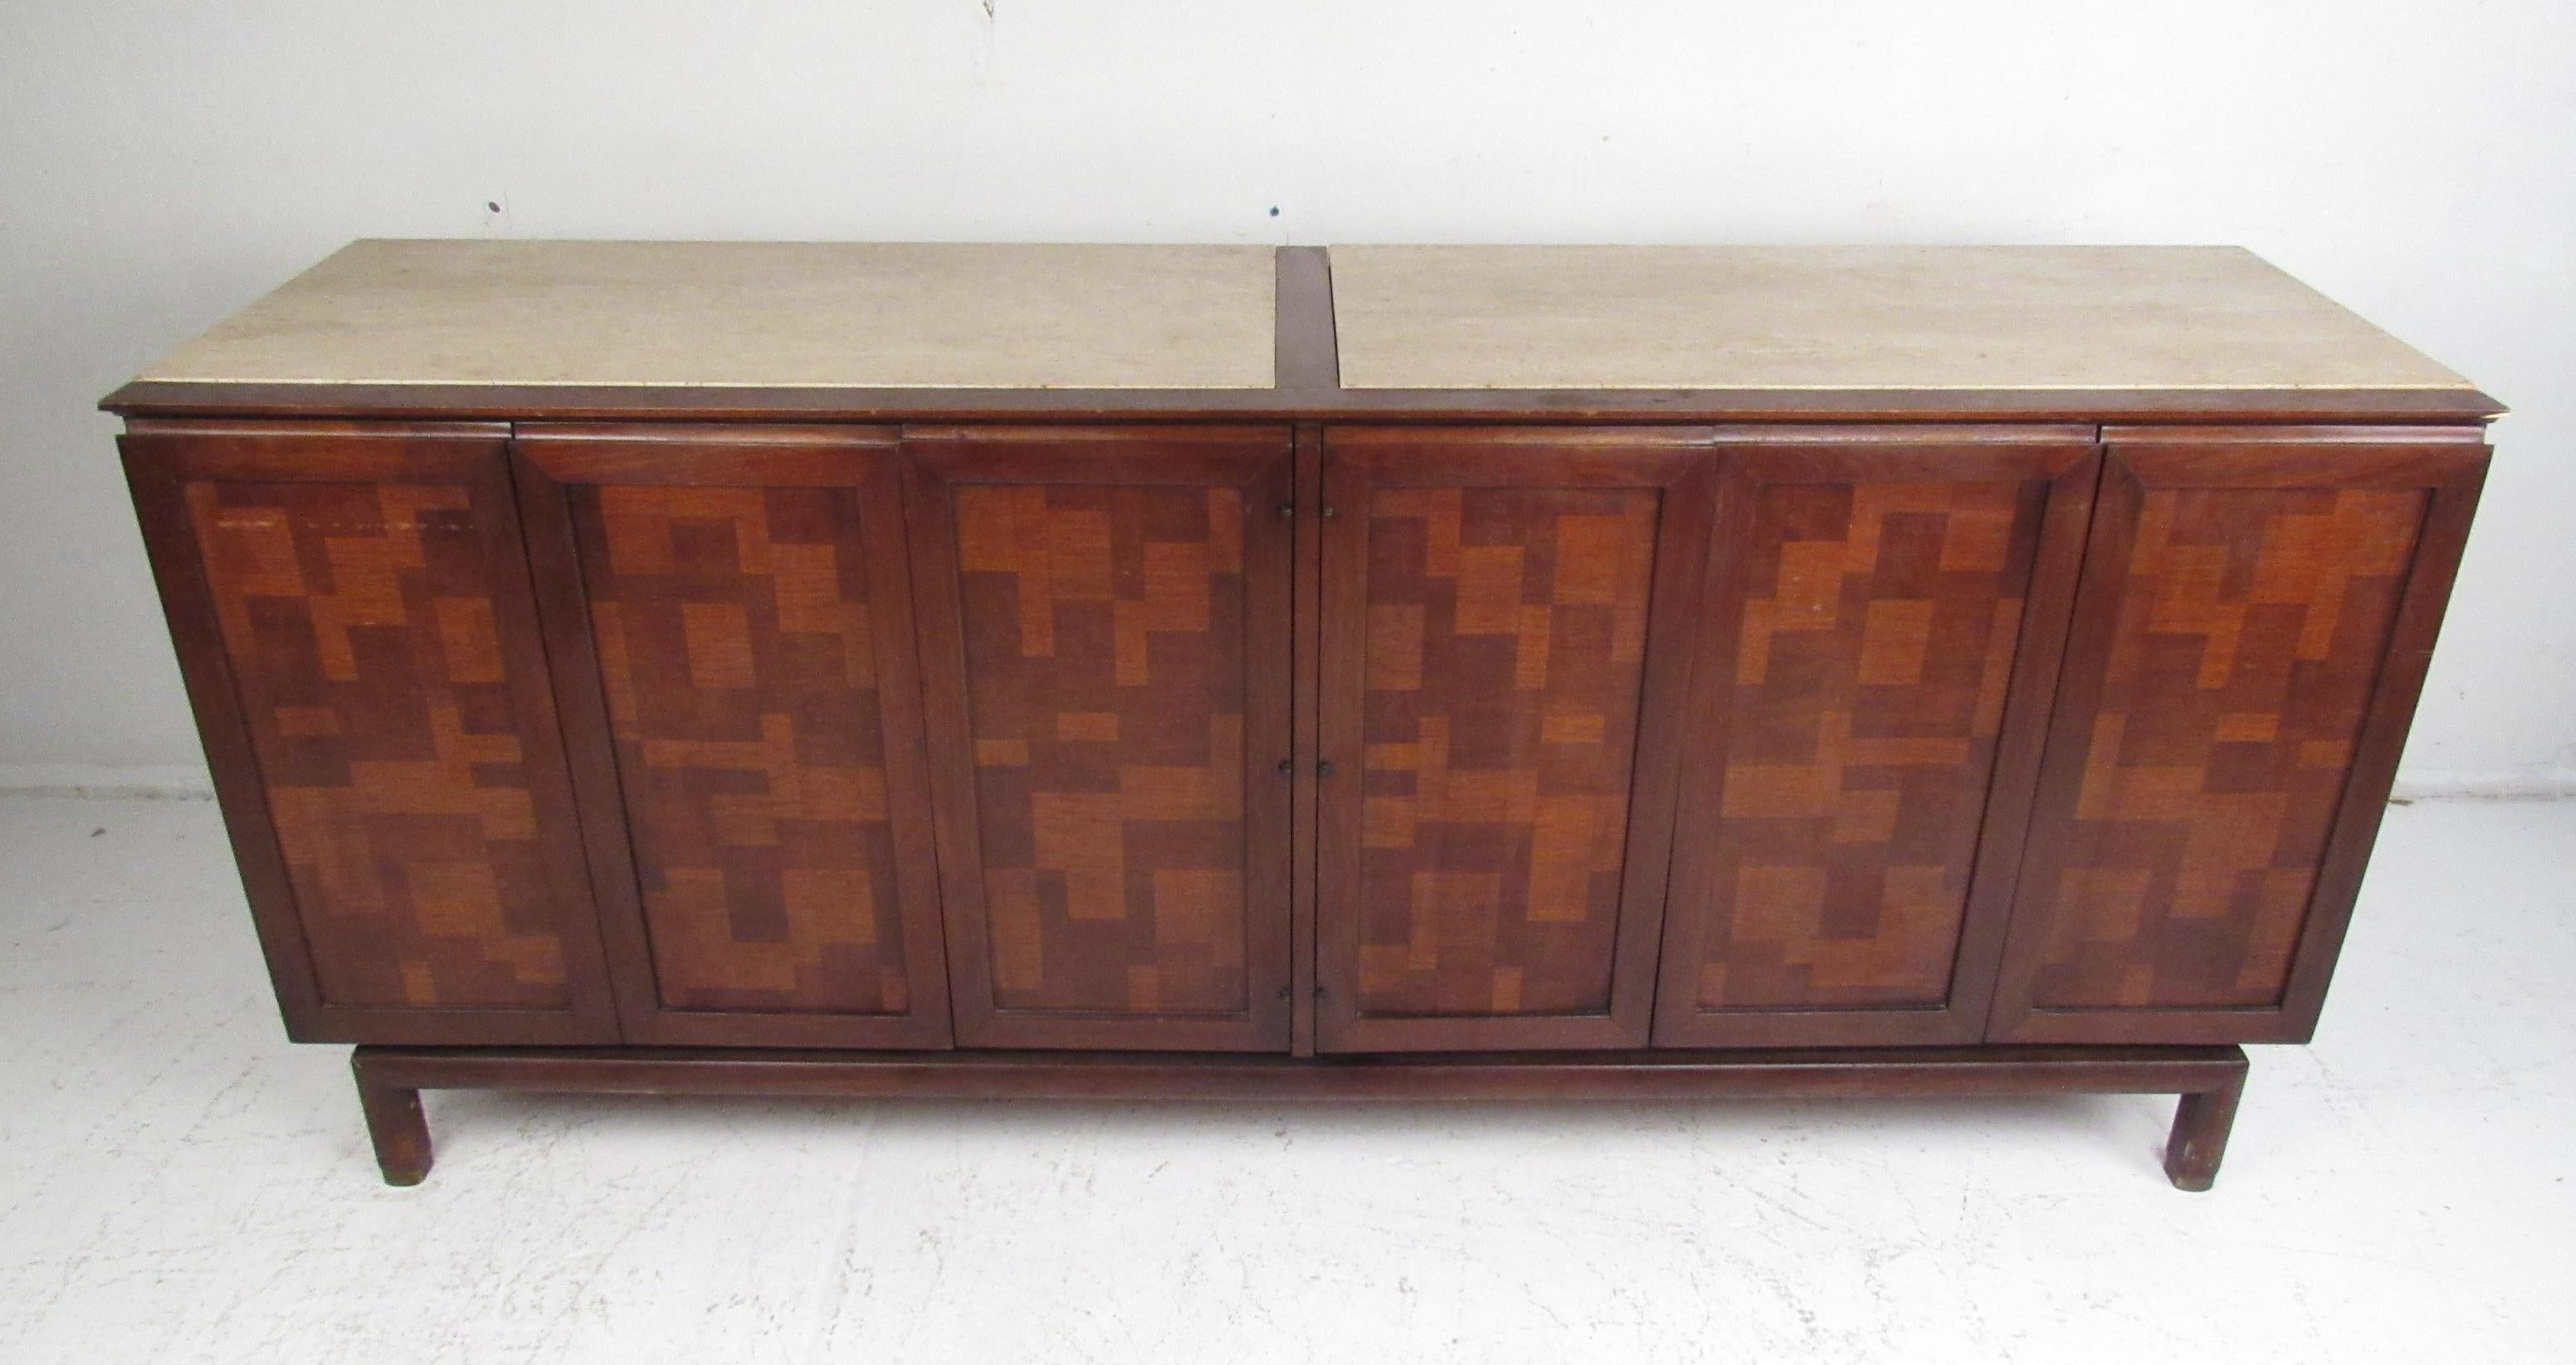 This beautiful vintage modern sideboard features an inlaid checker design on the front and a two-piece travertine top. An unusual design with retracting cabinet doors that open to unveil six hefty drawers providing plenty of room for storage. This